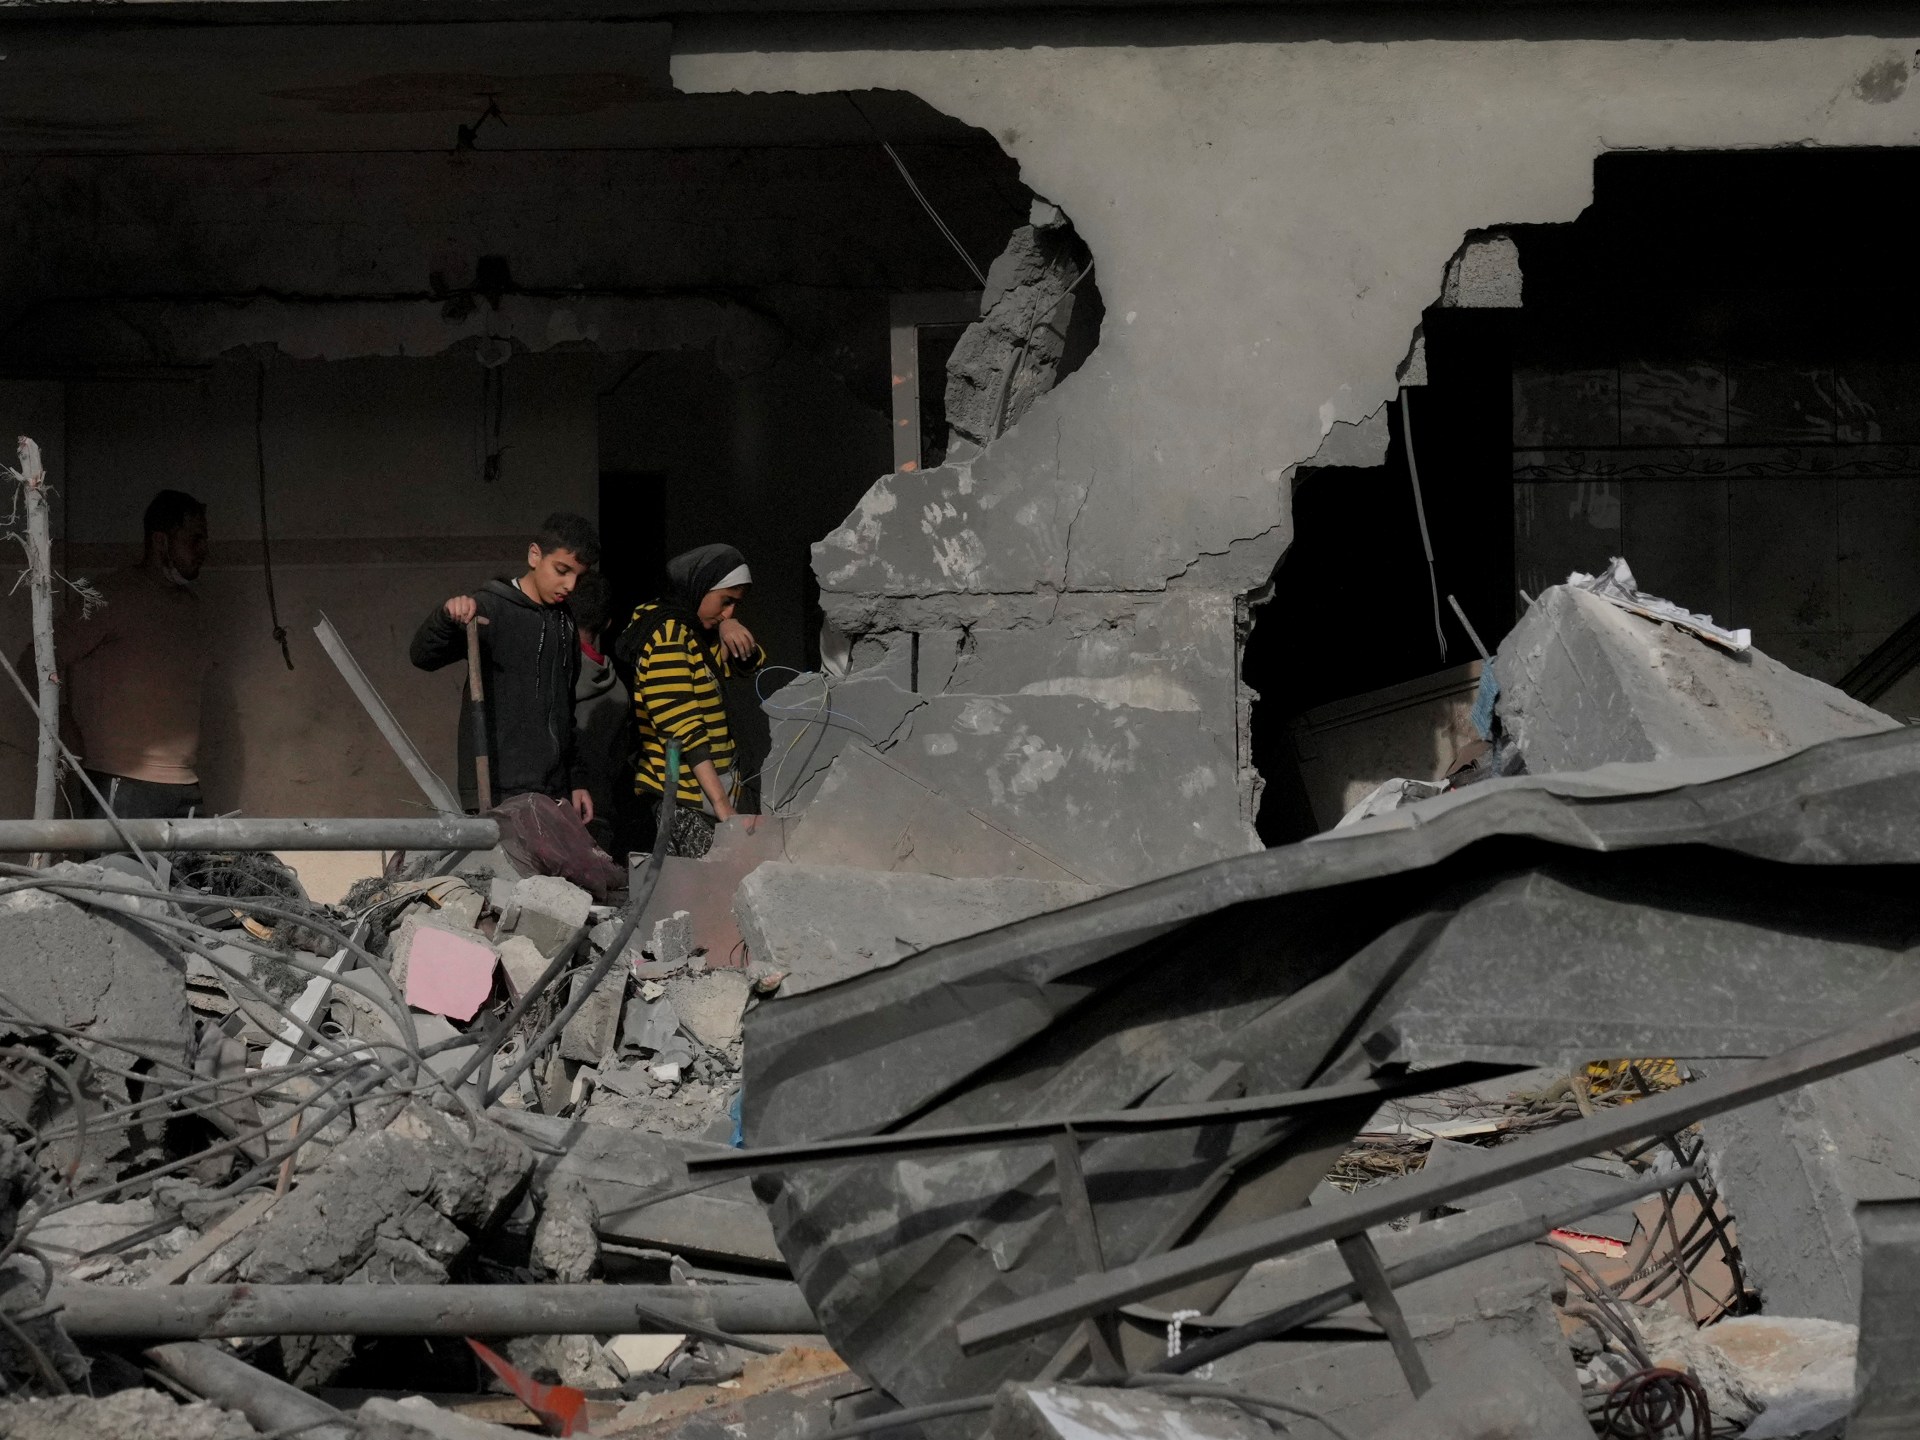 Nearly 300 killed in Gaza in 24 hours as Hamas, Netanyahu trade threats | Israel-Palestine conflict News